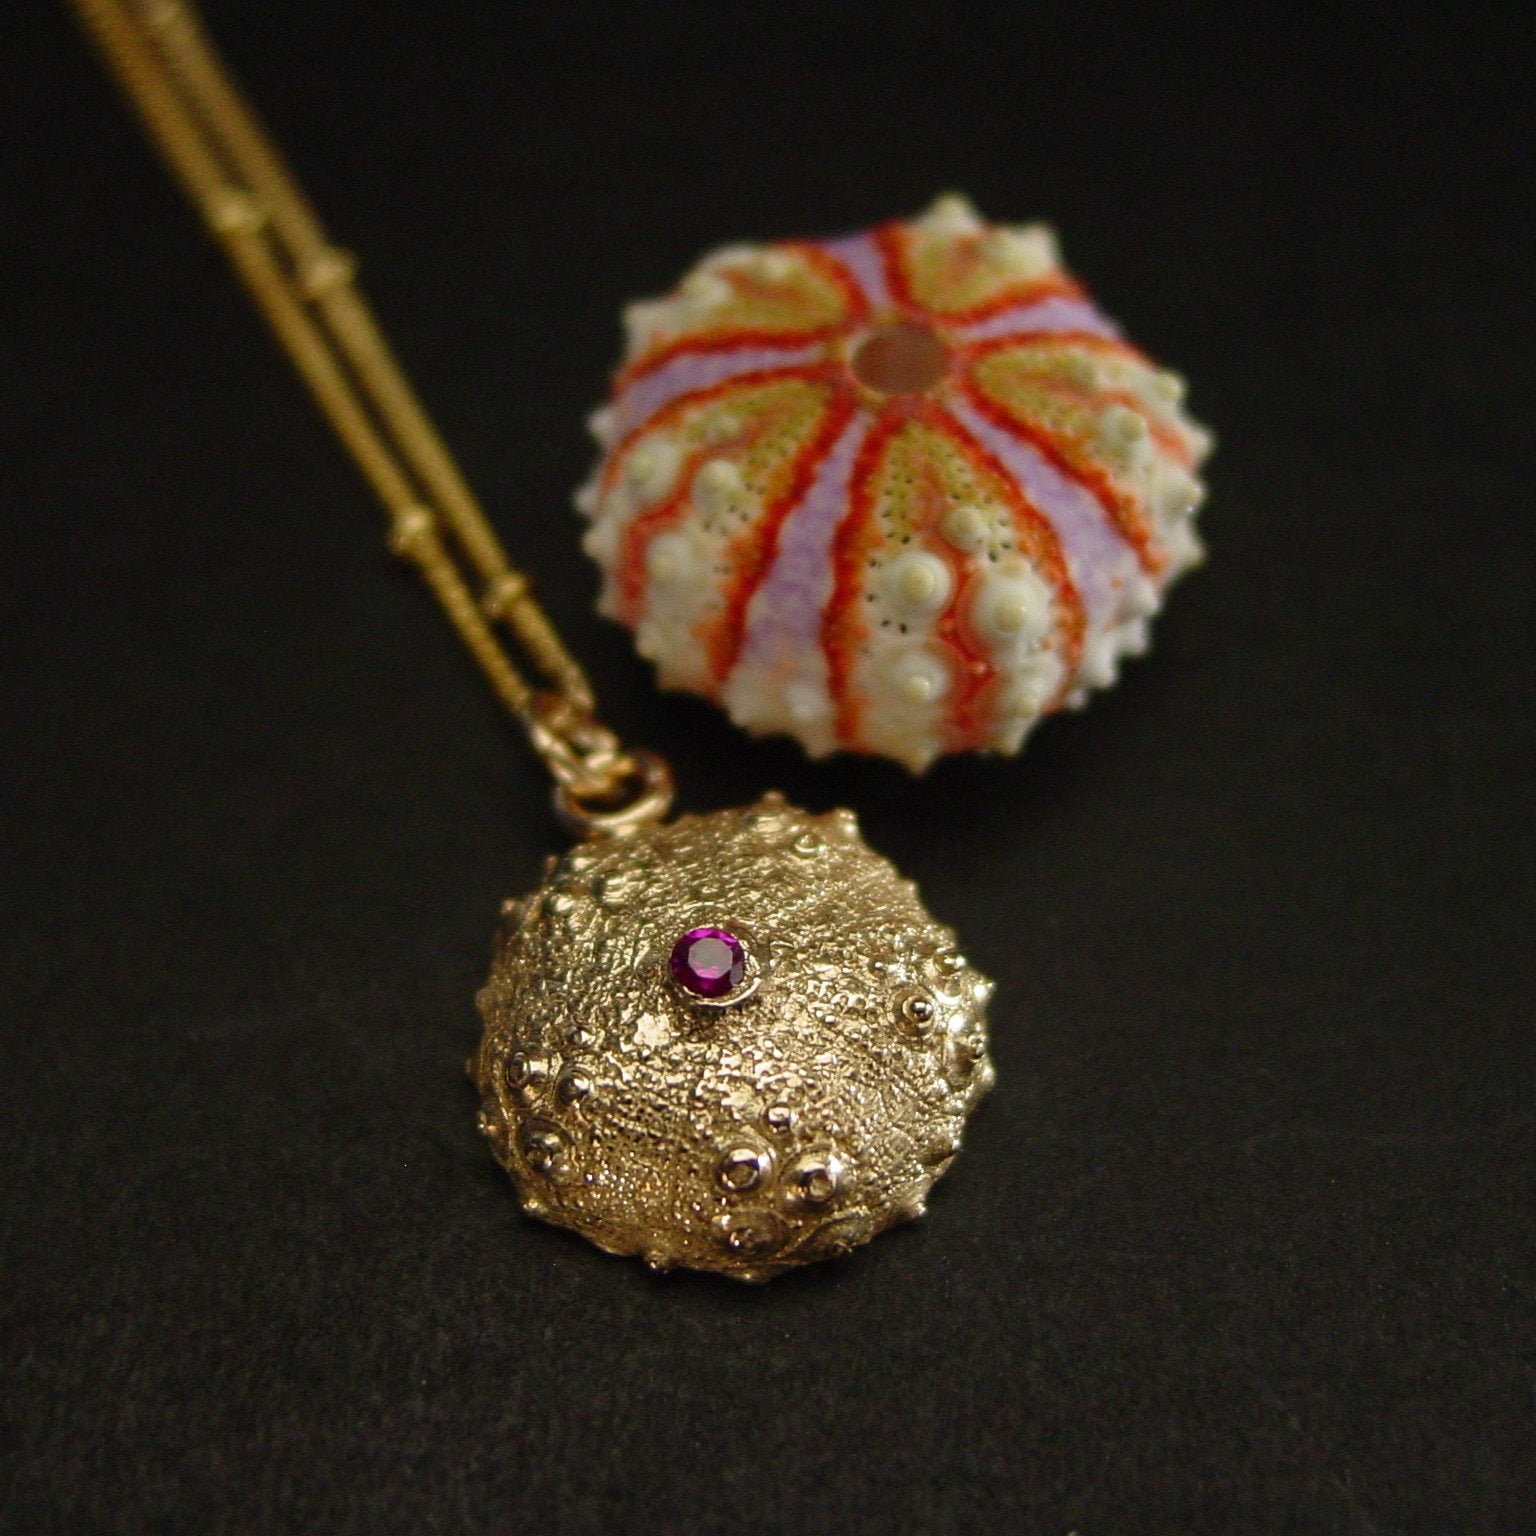 Sea Urchin Necklace With Ruby Deep Water Urchin Seashell Necklace - Etsy